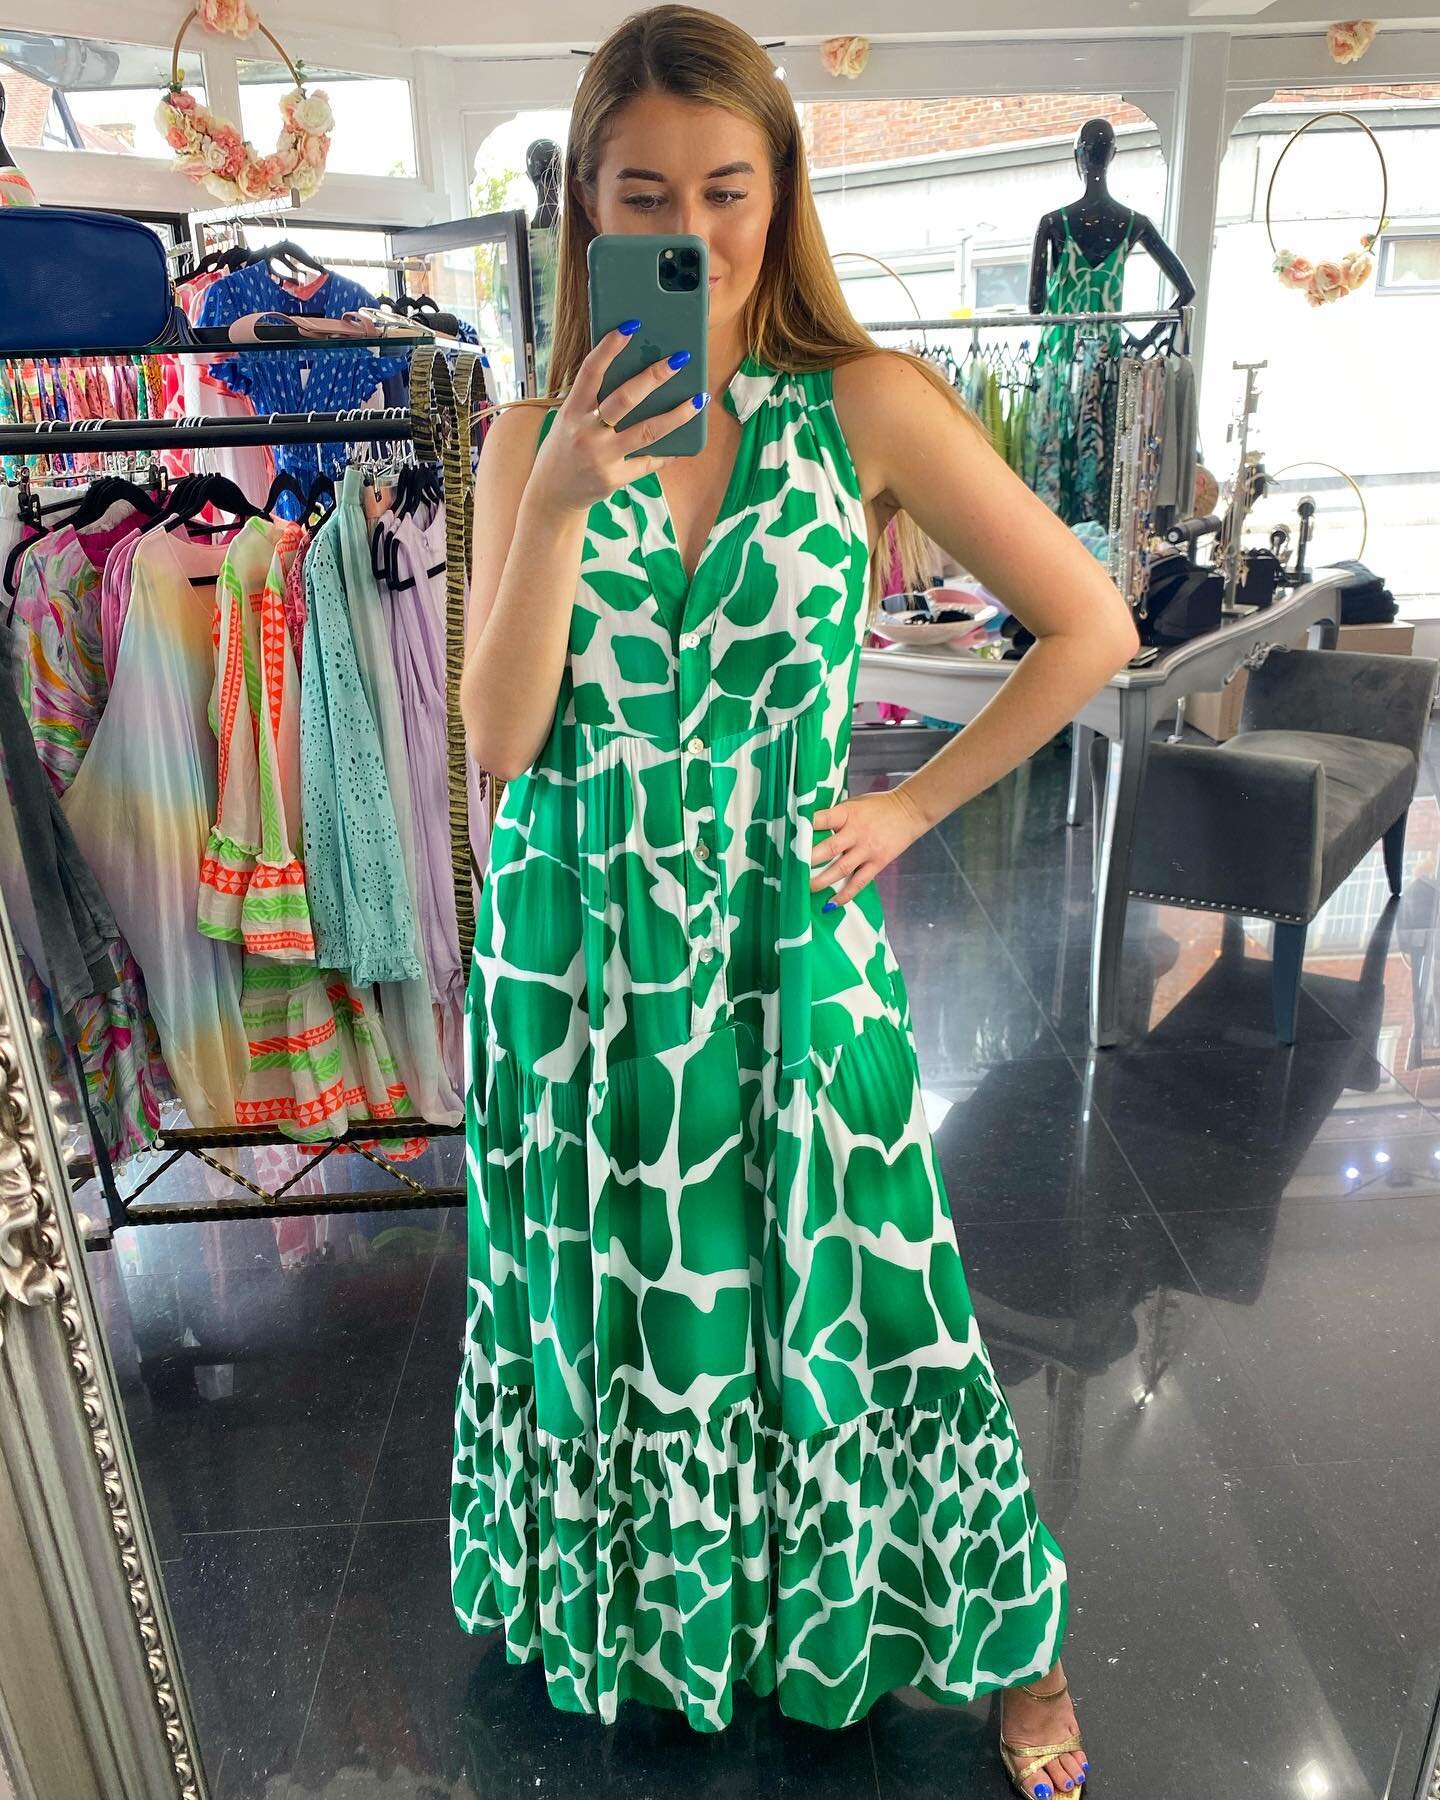 Our giraffe print dresses are selling quick! We have green and navy available, one size fits UK sizes 8-16 💚

Shop in both shops or online at www.blushboutiques.co.uk 💚
.
.
.
#giraffeprintdress #maxidress #summer #bucks #boutique #boutiqueshopping 